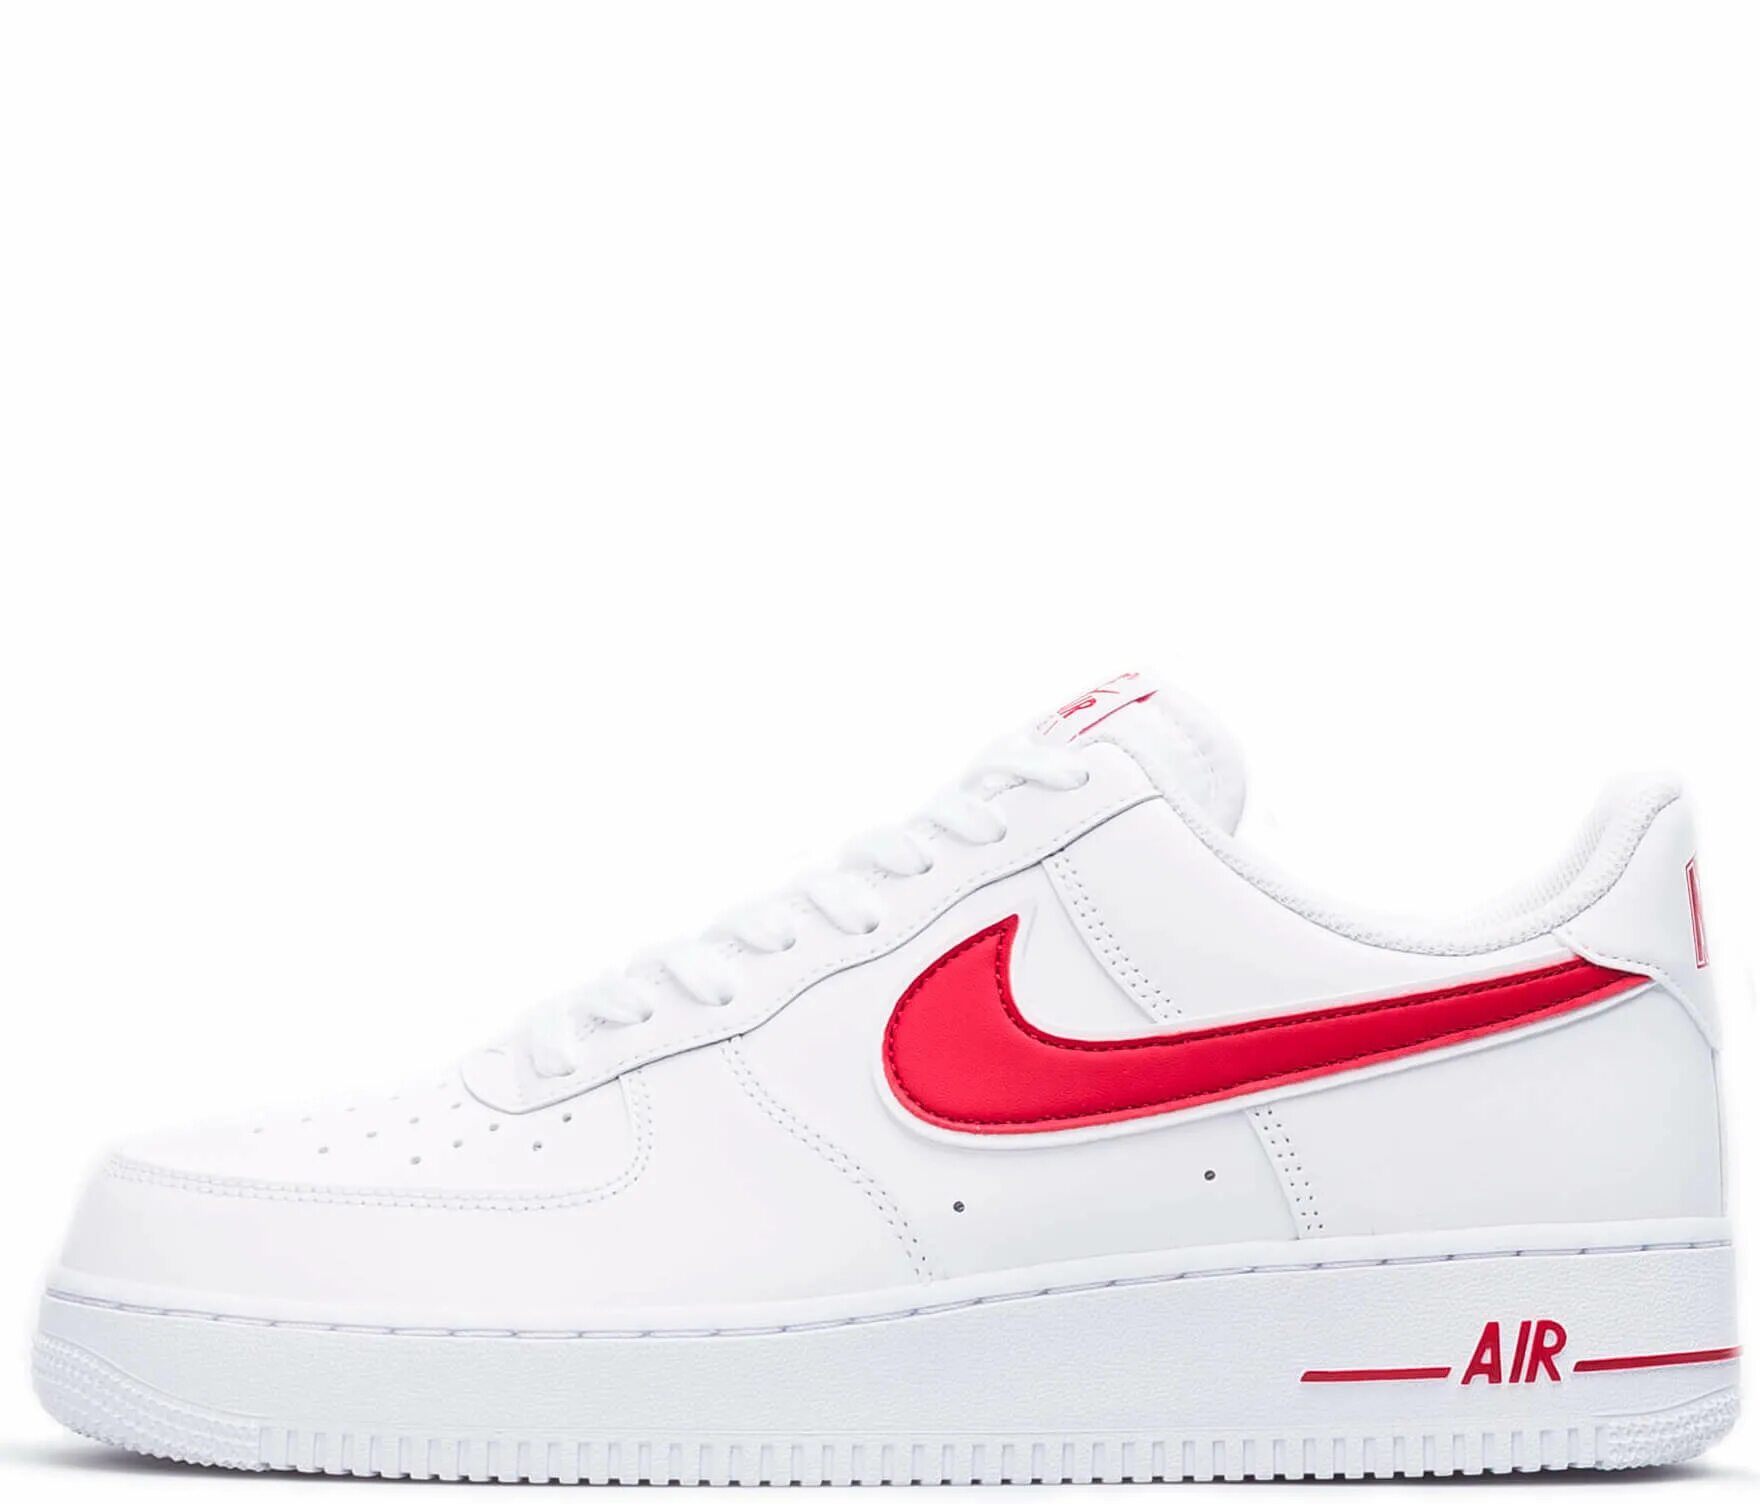 Найк force 1. Nike Air Force 1 Low White Red. Nike Air Force 1 lv8 White/Red. Nike Air Force 1 White Red. Nike Air Force 1 lv8 White.